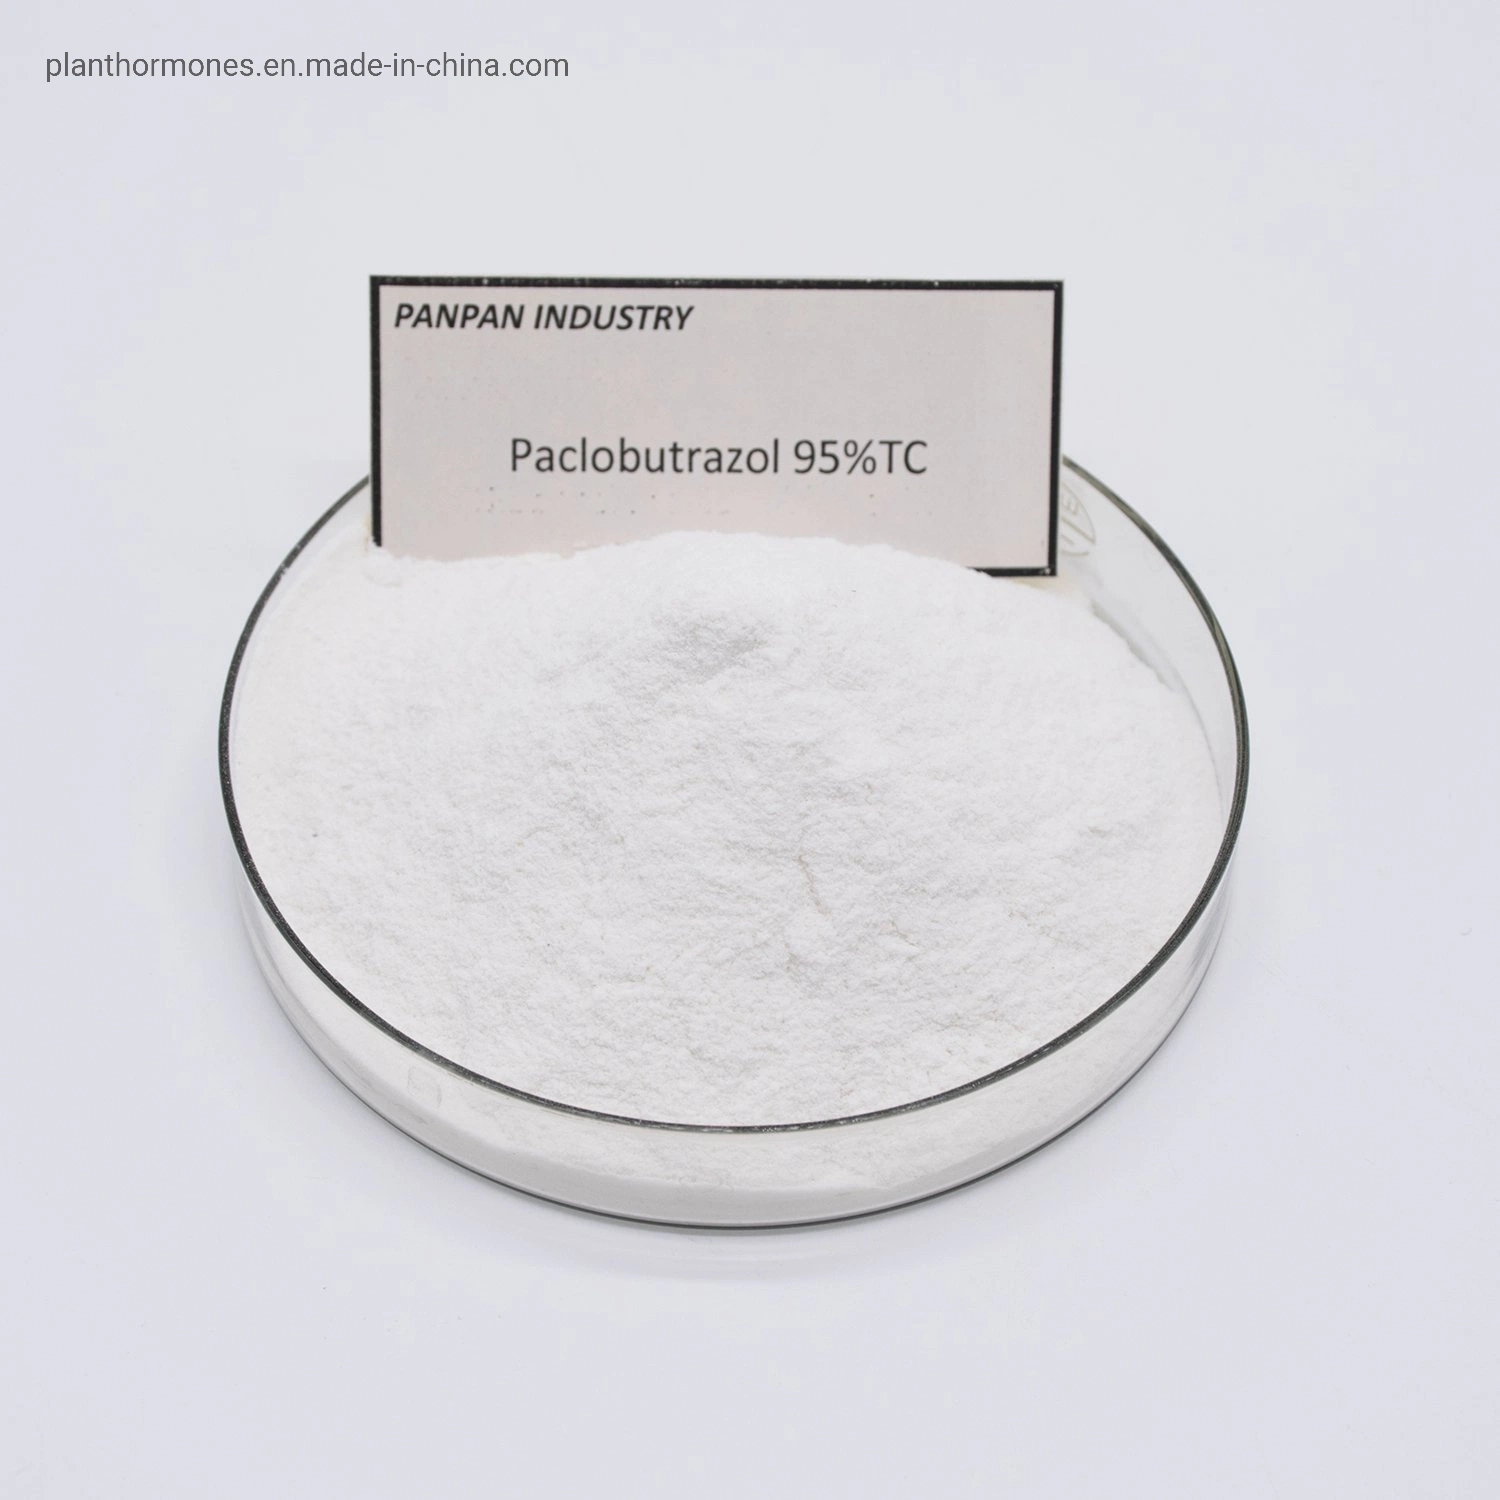 Hot Sale High Quality Paclobutrazol 95%Tc for Agriculture Use